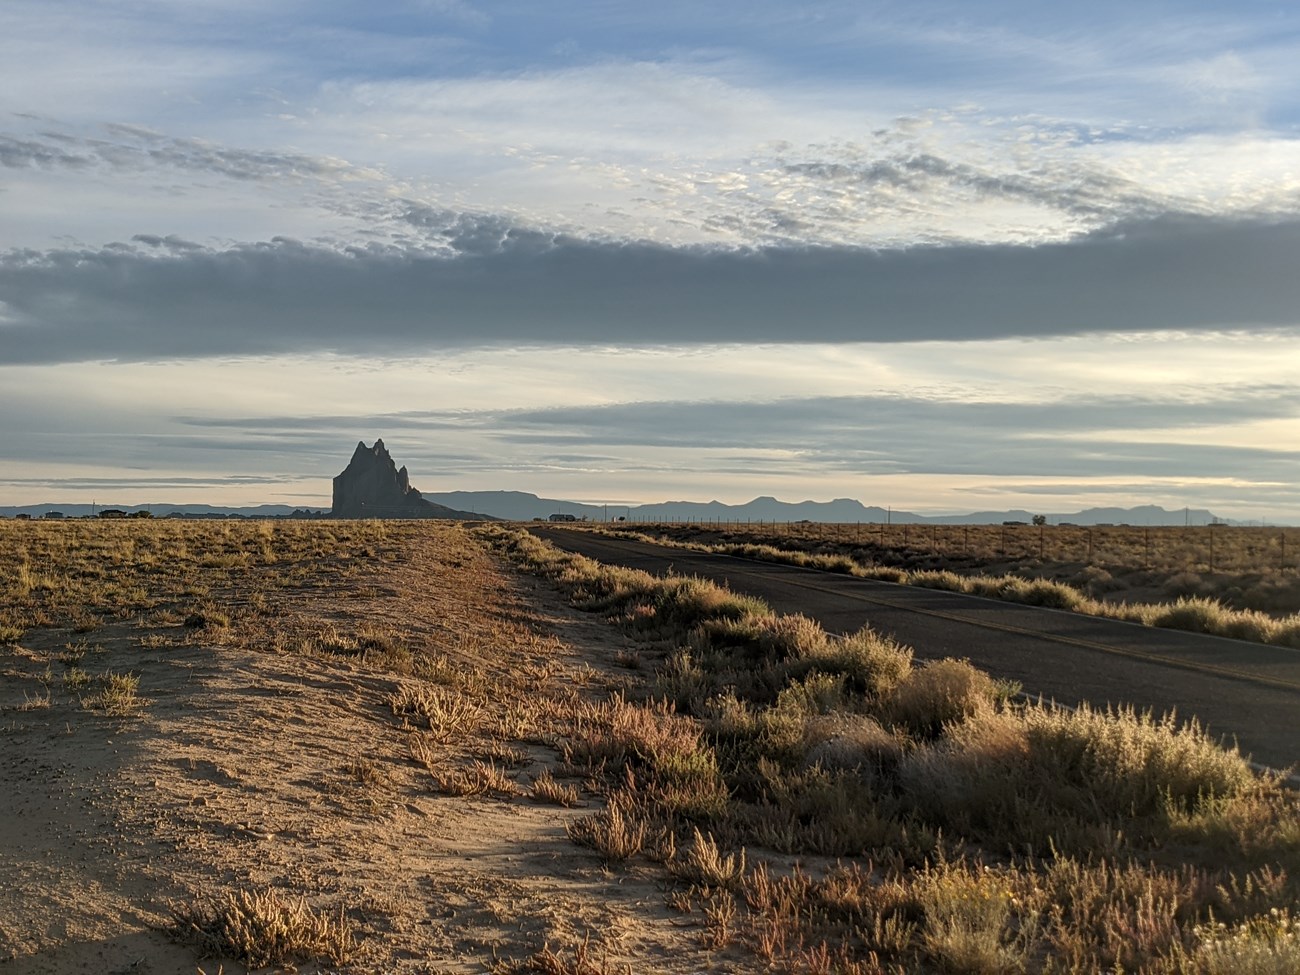 Shiprock, known as Tsé Bitʼaʼí in the Diné language, as seen from the highway in Fall 2021.